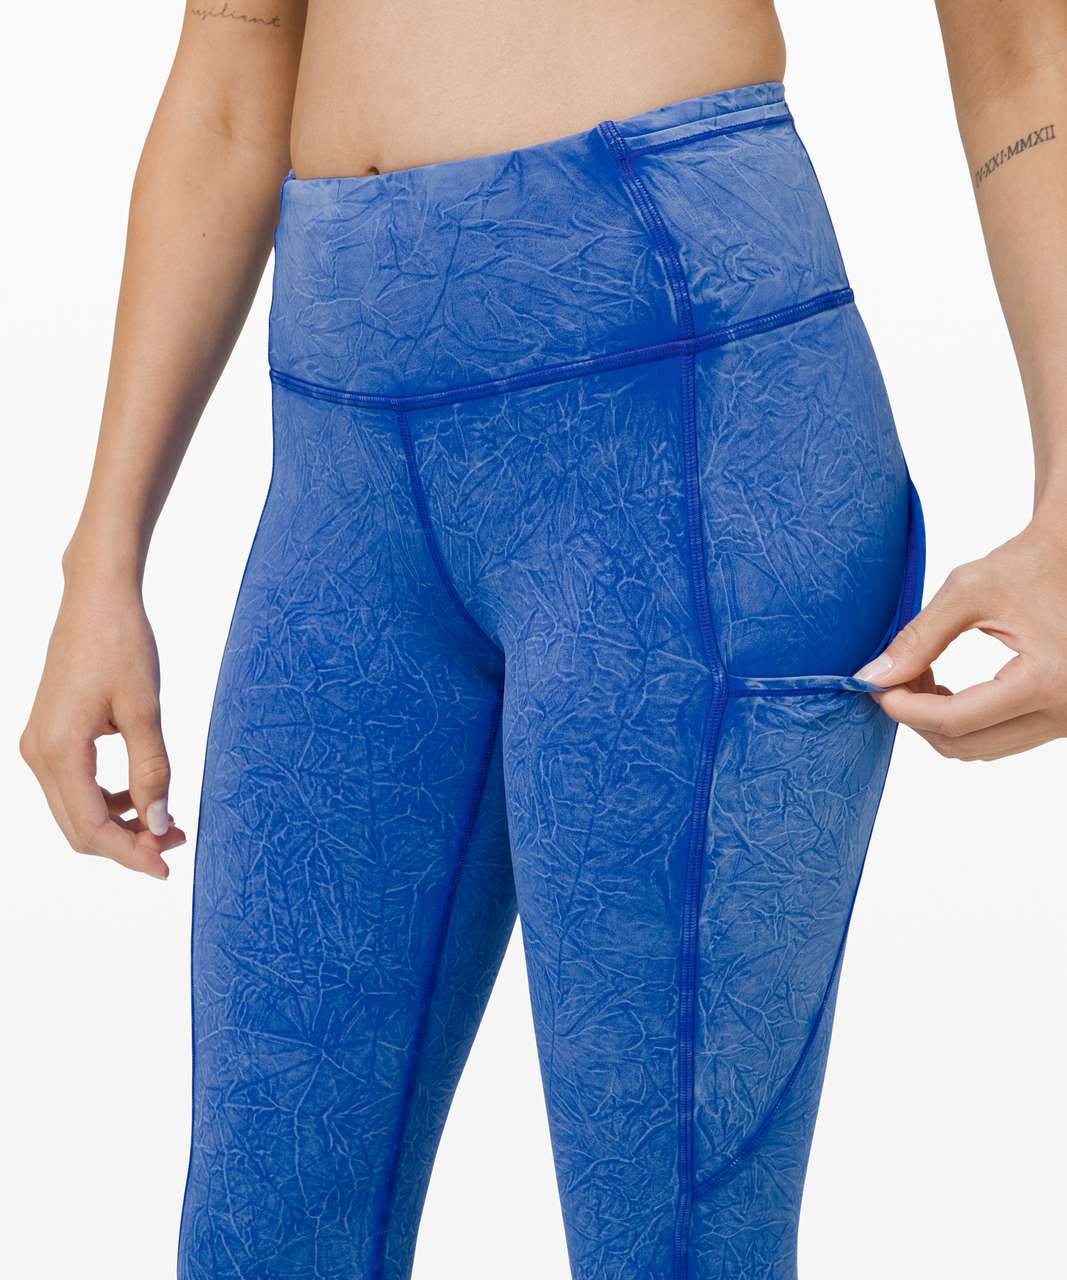 Lululemon's Ice Dyed Collection Will Give You Chills